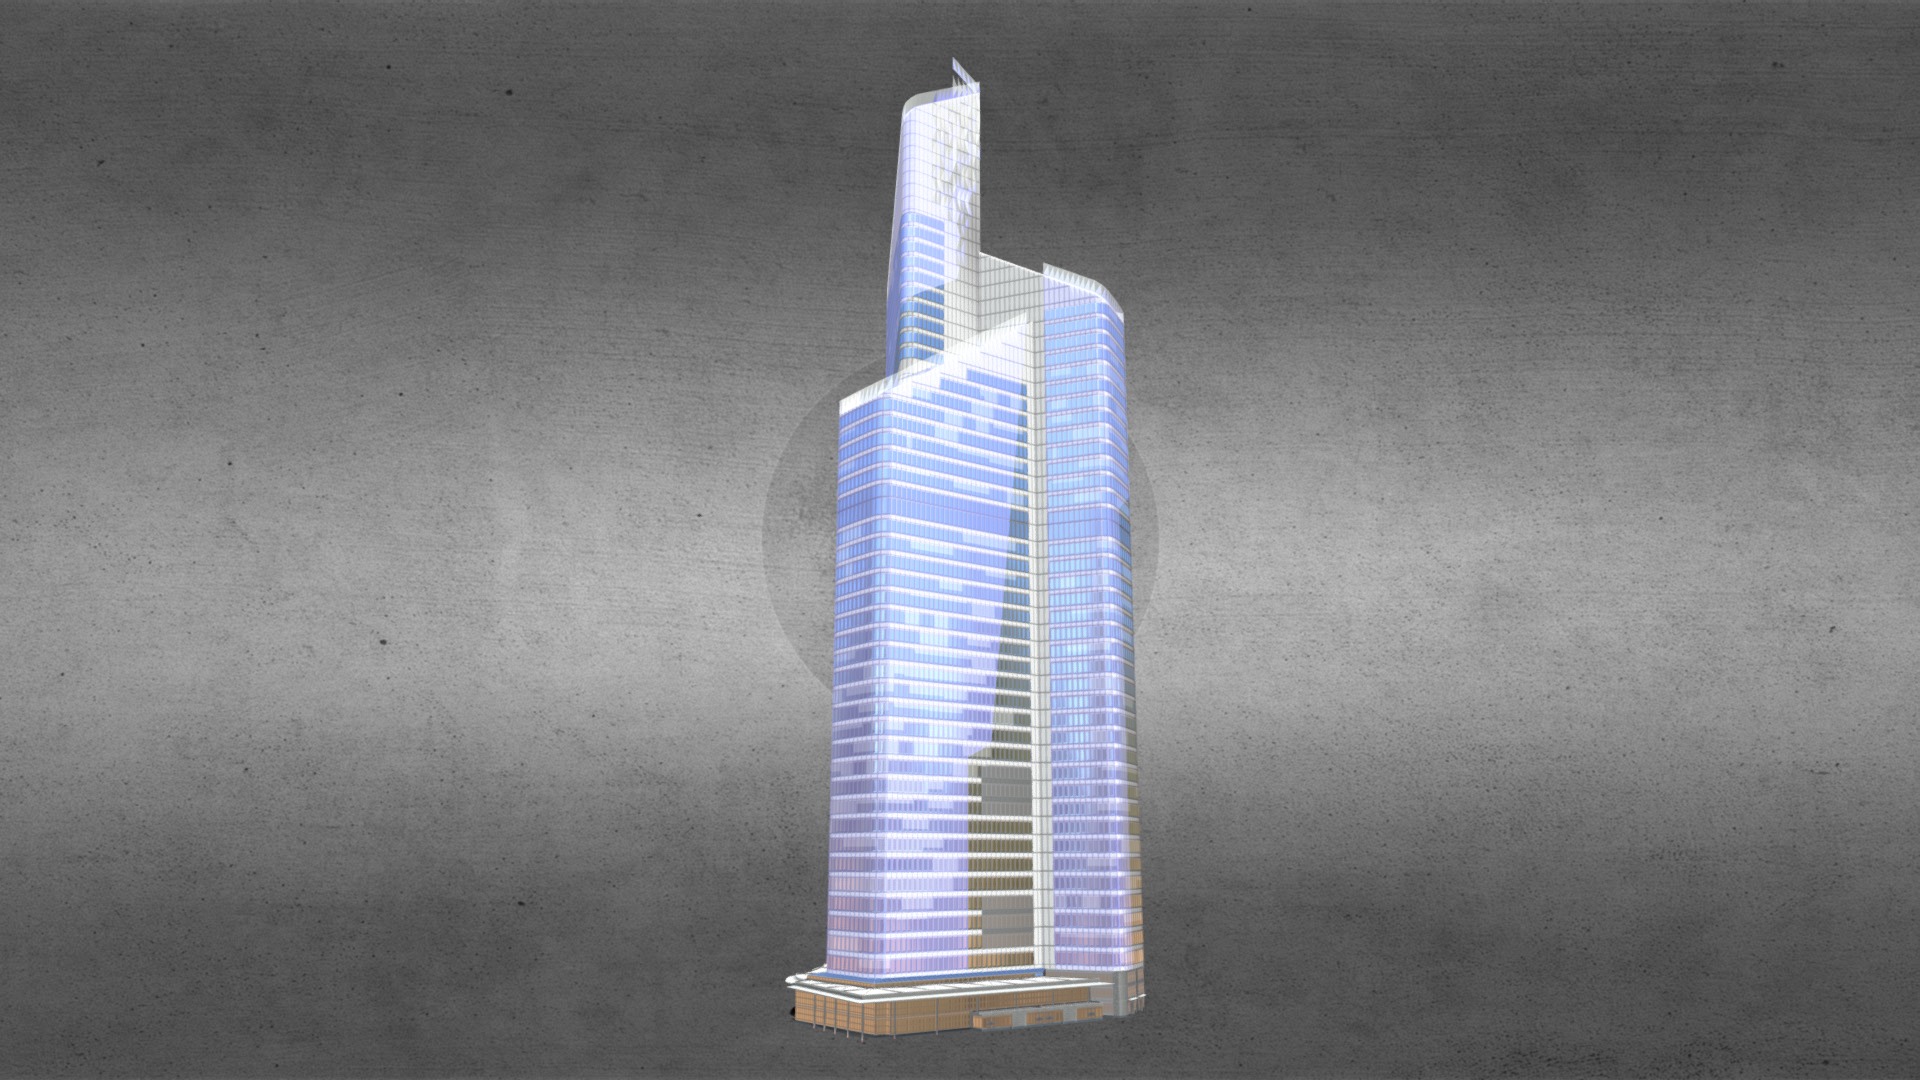 3D model First Tower – La Défense / Paris - This is a 3D model of the First Tower - La Défense / Paris. The 3D model is about a tall metal tower.